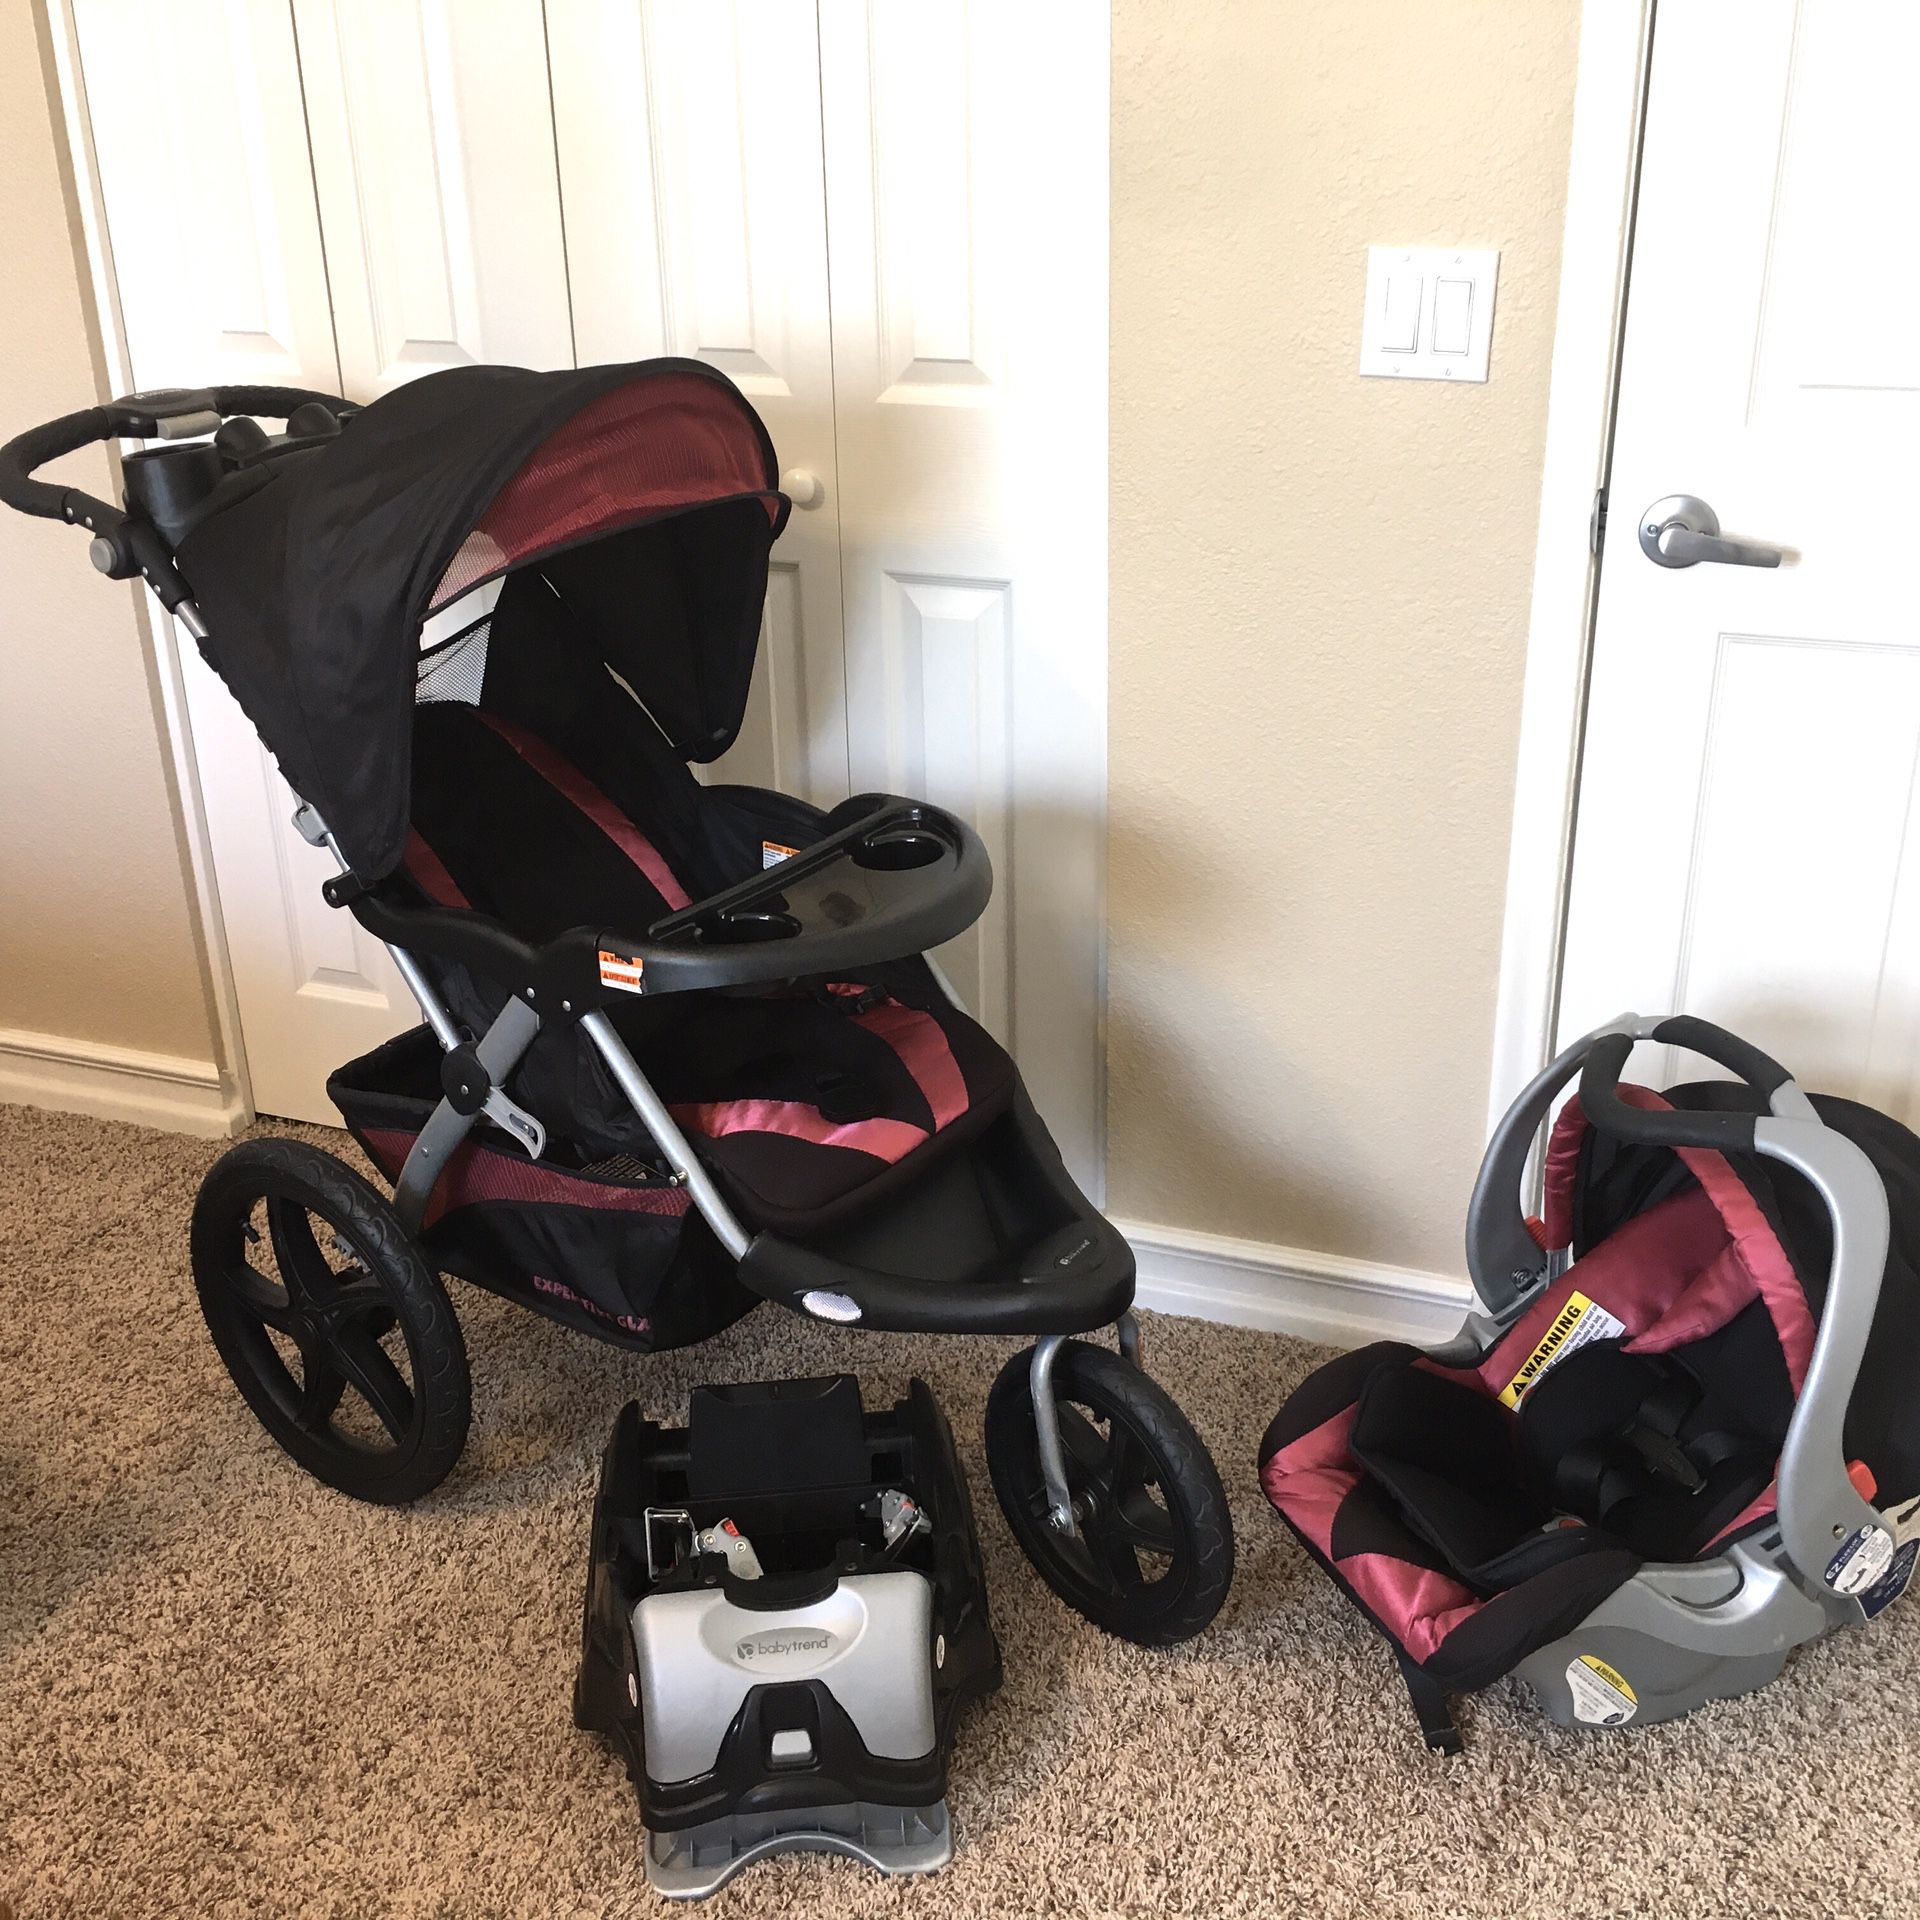 Babytrend Expedition GLX Jogger Stroller, Car seat, and Base